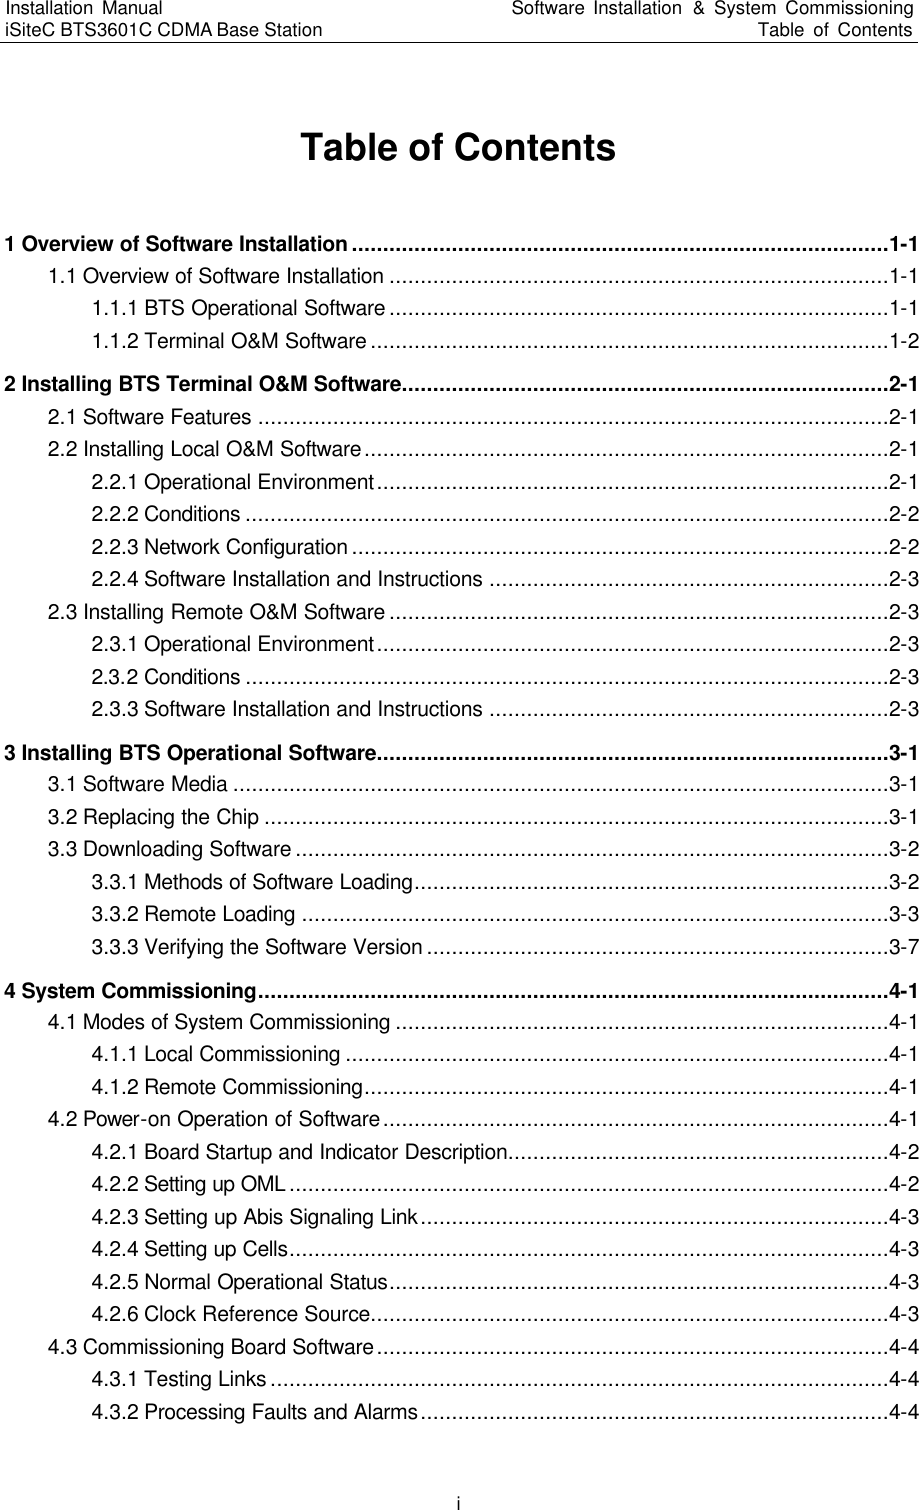 Installation Manual   iSiteC BTS3601C CDMA Base Station Software Installation &amp; System Commissioning Table of Contents  i Table of Contents 1 Overview of Software Installation ......................................................................................1-1 1.1 Overview of Software Installation ................................................................................1-1 1.1.1 BTS Operational Software ................................................................................1-1 1.1.2 Terminal O&amp;M Software ...................................................................................1-2 2 Installing BTS Terminal O&amp;M Software..............................................................................2-1 2.1 Software Features .....................................................................................................2-1 2.2 Installing Local O&amp;M Software....................................................................................2-1 2.2.1 Operational Environment..................................................................................2-1 2.2.2 Conditions .......................................................................................................2-2 2.2.3 Network Configuration ......................................................................................2-2 2.2.4 Software Installation and Instructions ................................................................2-3 2.3 Installing Remote O&amp;M Software ................................................................................2-3 2.3.1 Operational Environment..................................................................................2-3 2.3.2 Conditions .......................................................................................................2-3 2.3.3 Software Installation and Instructions ................................................................2-3 3 Installing BTS Operational Software..................................................................................3-1 3.1 Software Media .........................................................................................................3-1 3.2 Replacing the Chip ....................................................................................................3-1 3.3 Downloading Software ...............................................................................................3-2 3.3.1 Methods of Software Loading............................................................................3-2 3.3.2 Remote Loading ..............................................................................................3-3 3.3.3 Verifying the Software Version ..........................................................................3-7 4 System Commissioning.....................................................................................................4-1 4.1 Modes of System Commissioning ...............................................................................4-1 4.1.1 Local Commissioning .......................................................................................4-1 4.1.2 Remote Commissioning....................................................................................4-1 4.2 Power-on Operation of Software.................................................................................4-1 4.2.1 Board Startup and Indicator Description.............................................................4-2 4.2.2 Setting up OML ................................................................................................4-2 4.2.3 Setting up Abis Signaling Link...........................................................................4-3 4.2.4 Setting up Cells................................................................................................4-3 4.2.5 Normal Operational Status................................................................................4-3 4.2.6 Clock Reference Source...................................................................................4-3 4.3 Commissioning Board Software..................................................................................4-4 4.3.1 Testing Links ...................................................................................................4-4 4.3.2 Processing Faults and Alarms...........................................................................4-4 